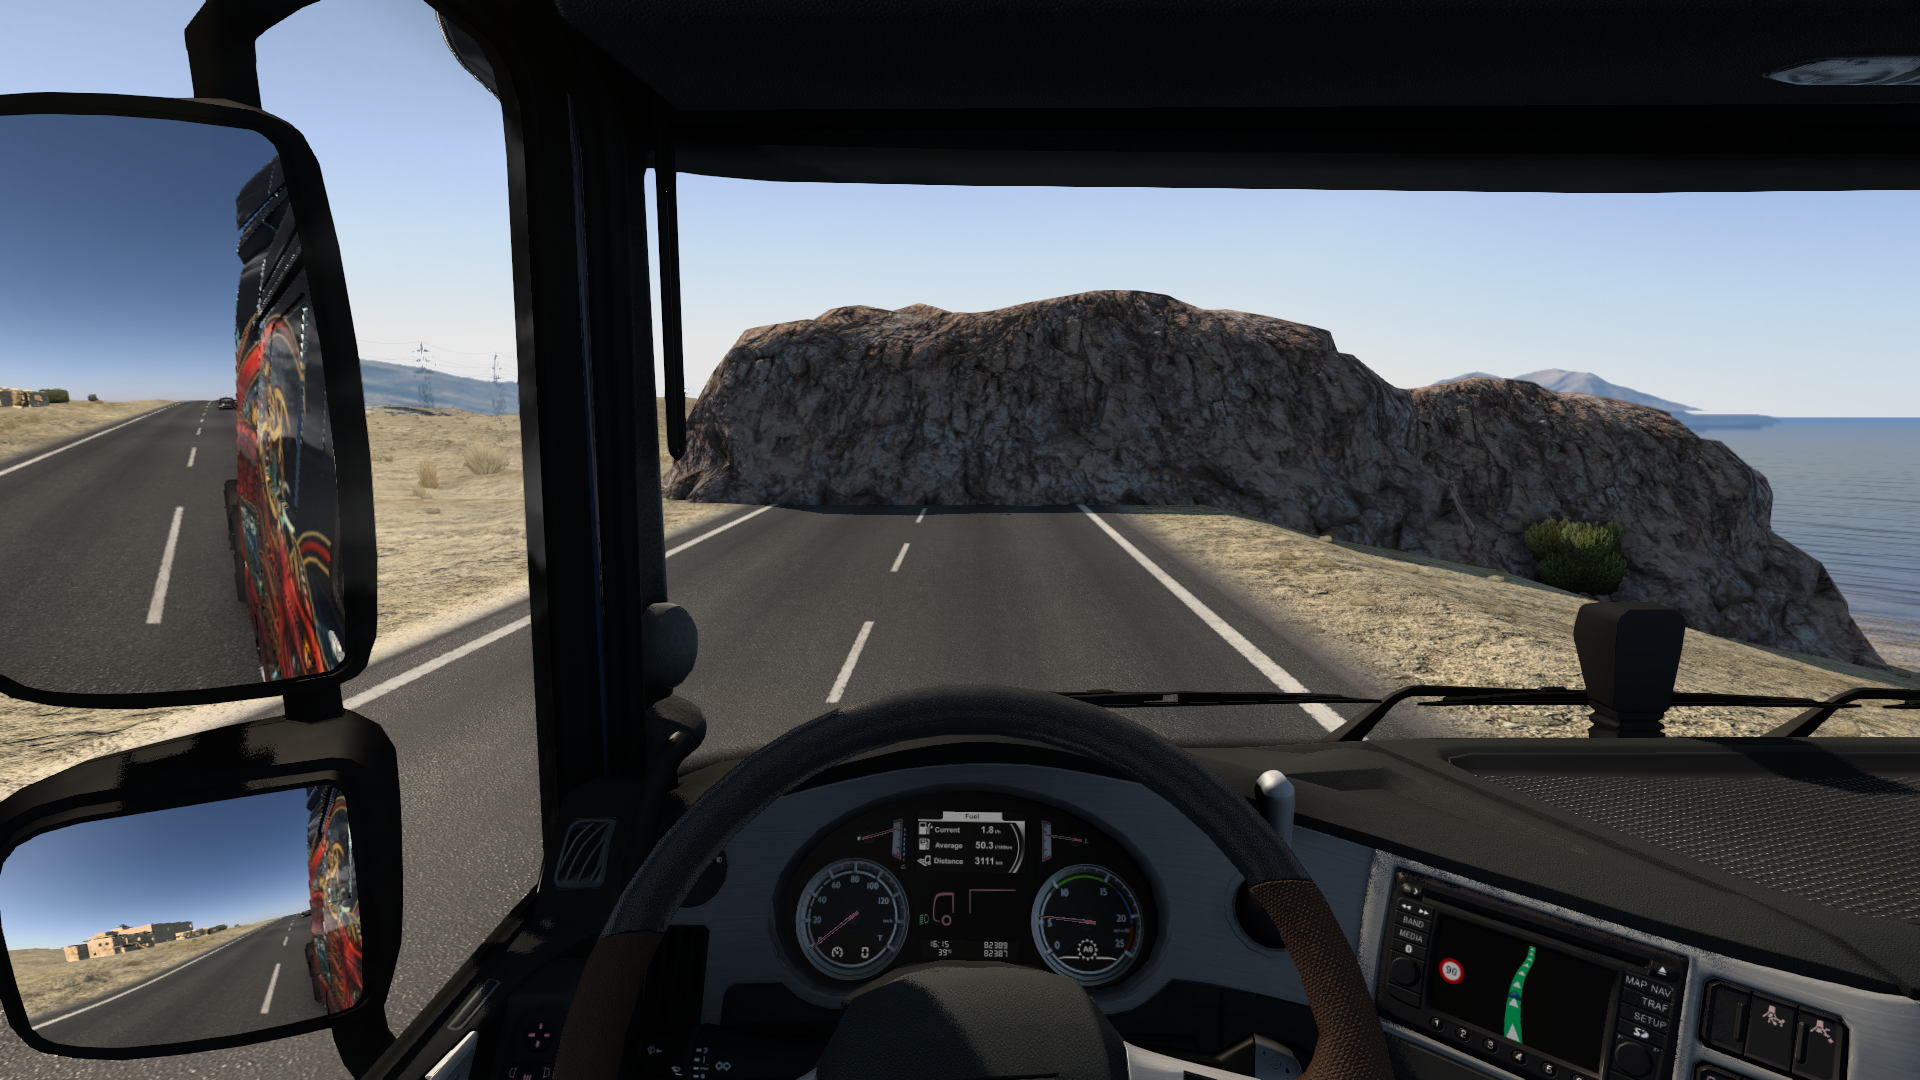 ets2_20230610_105326_00.png